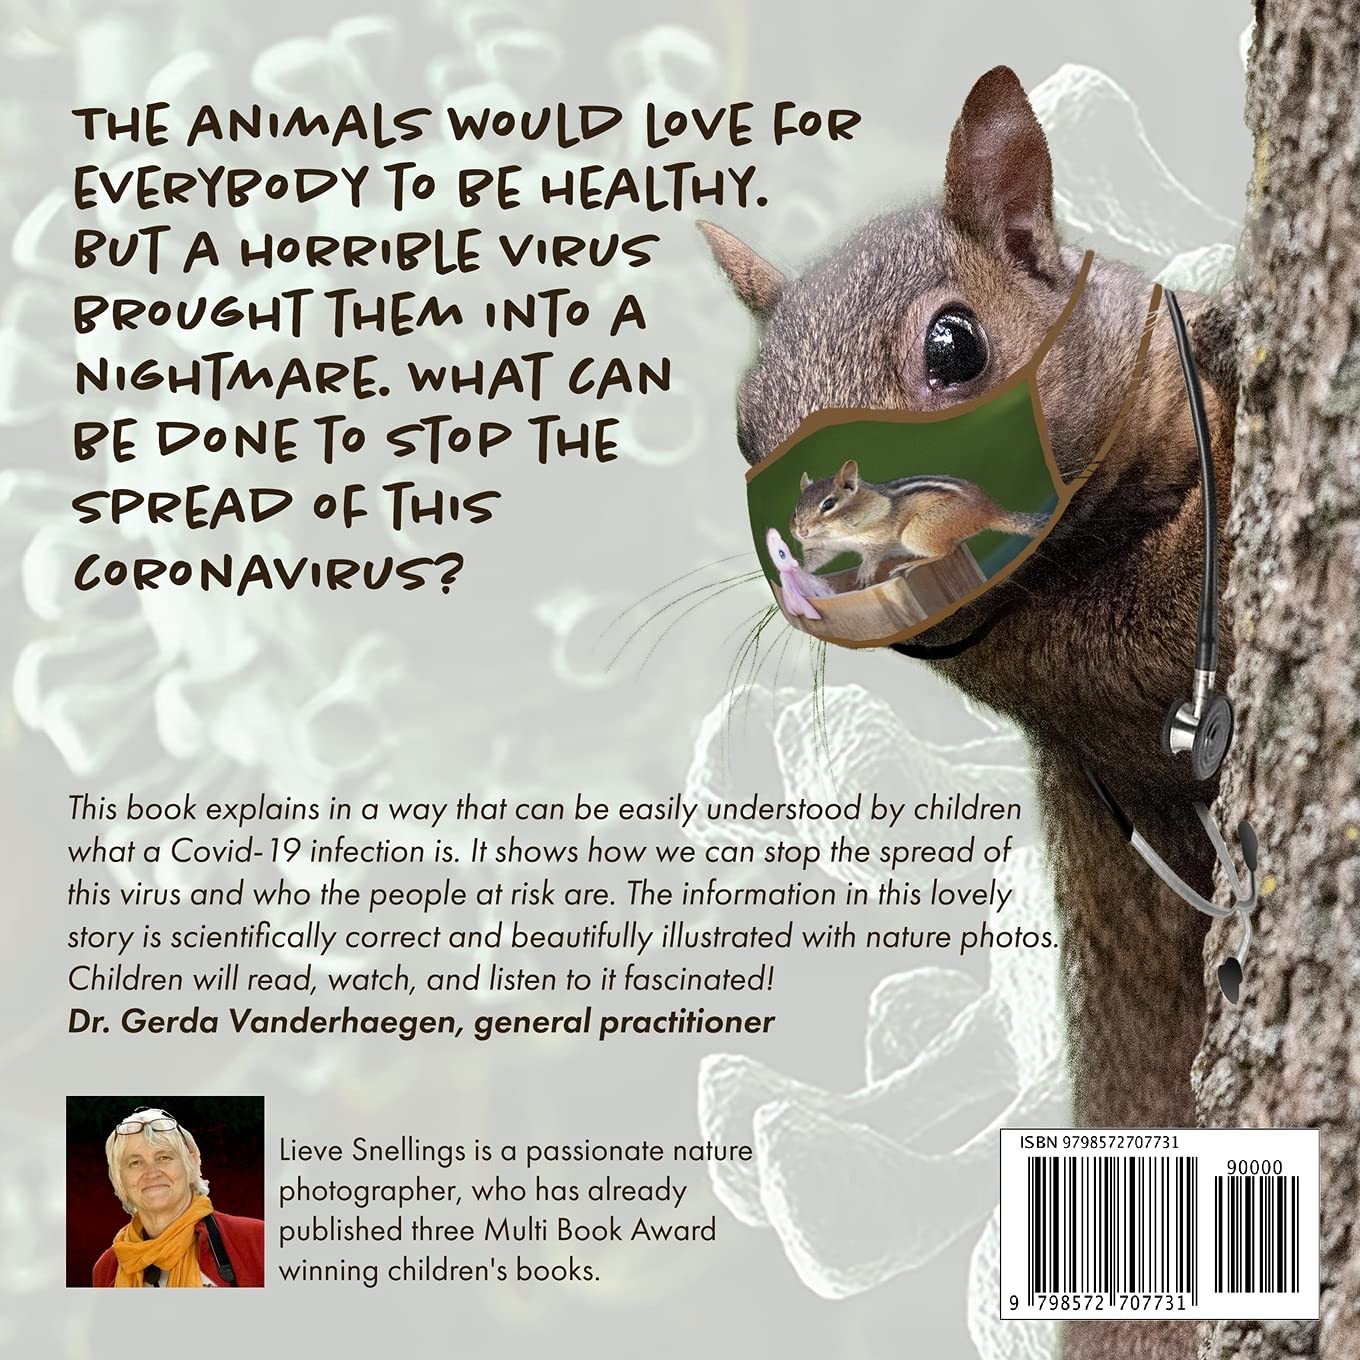 Why We Wear a Mask: How a squirrel family is helping to stop the spread of Covid-19 (Stories of Groundhogs, Squirrels, and Chipmunks)